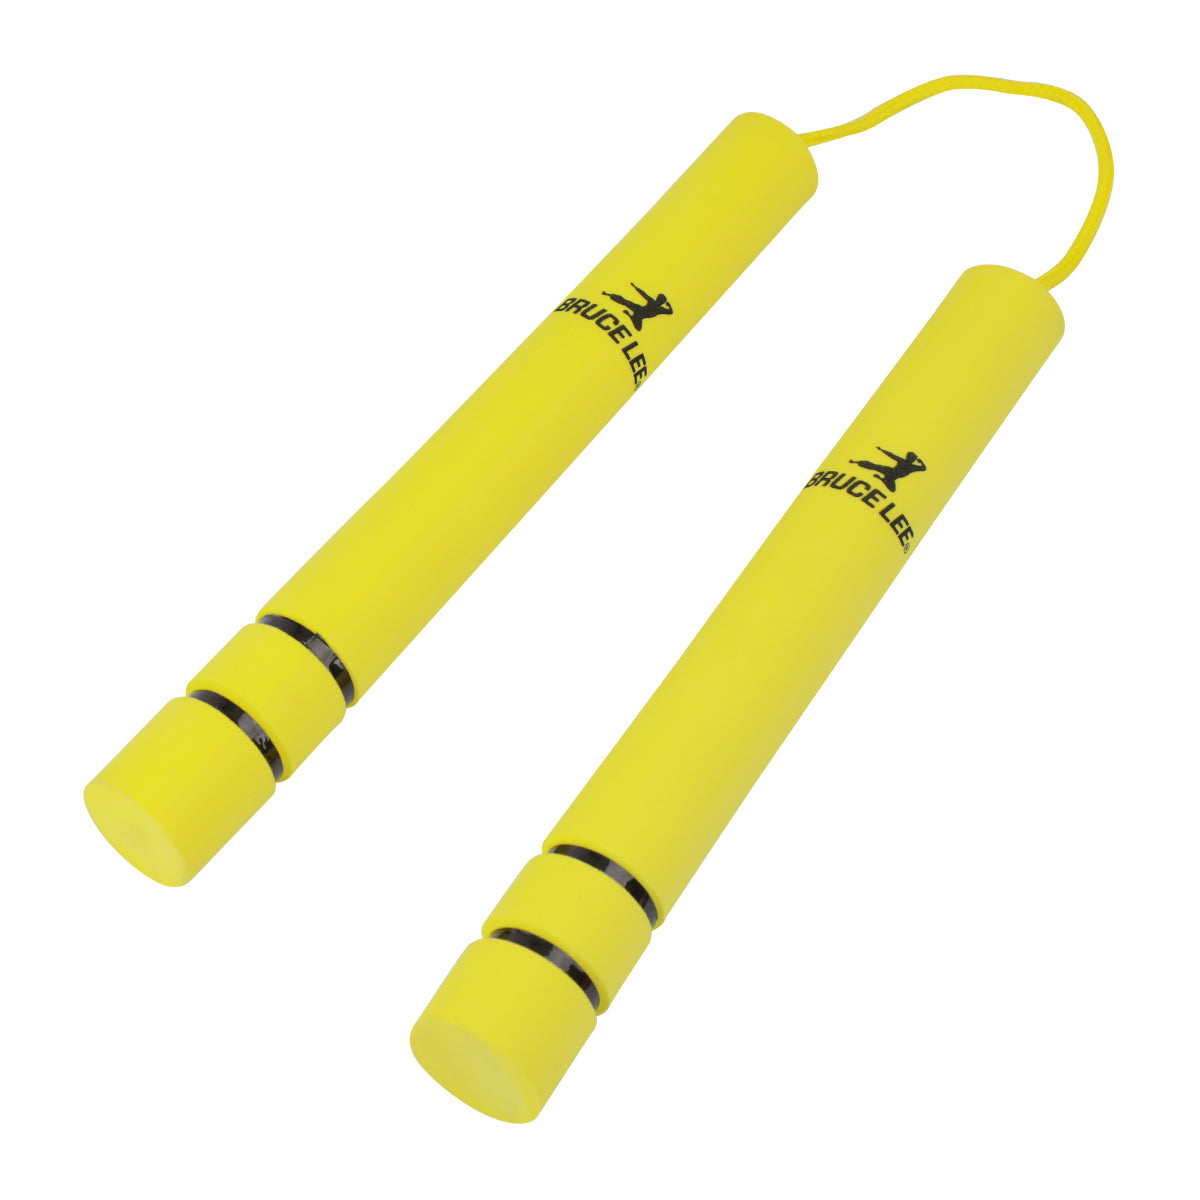 bruce lee yellow jumpsuit with nunchucks